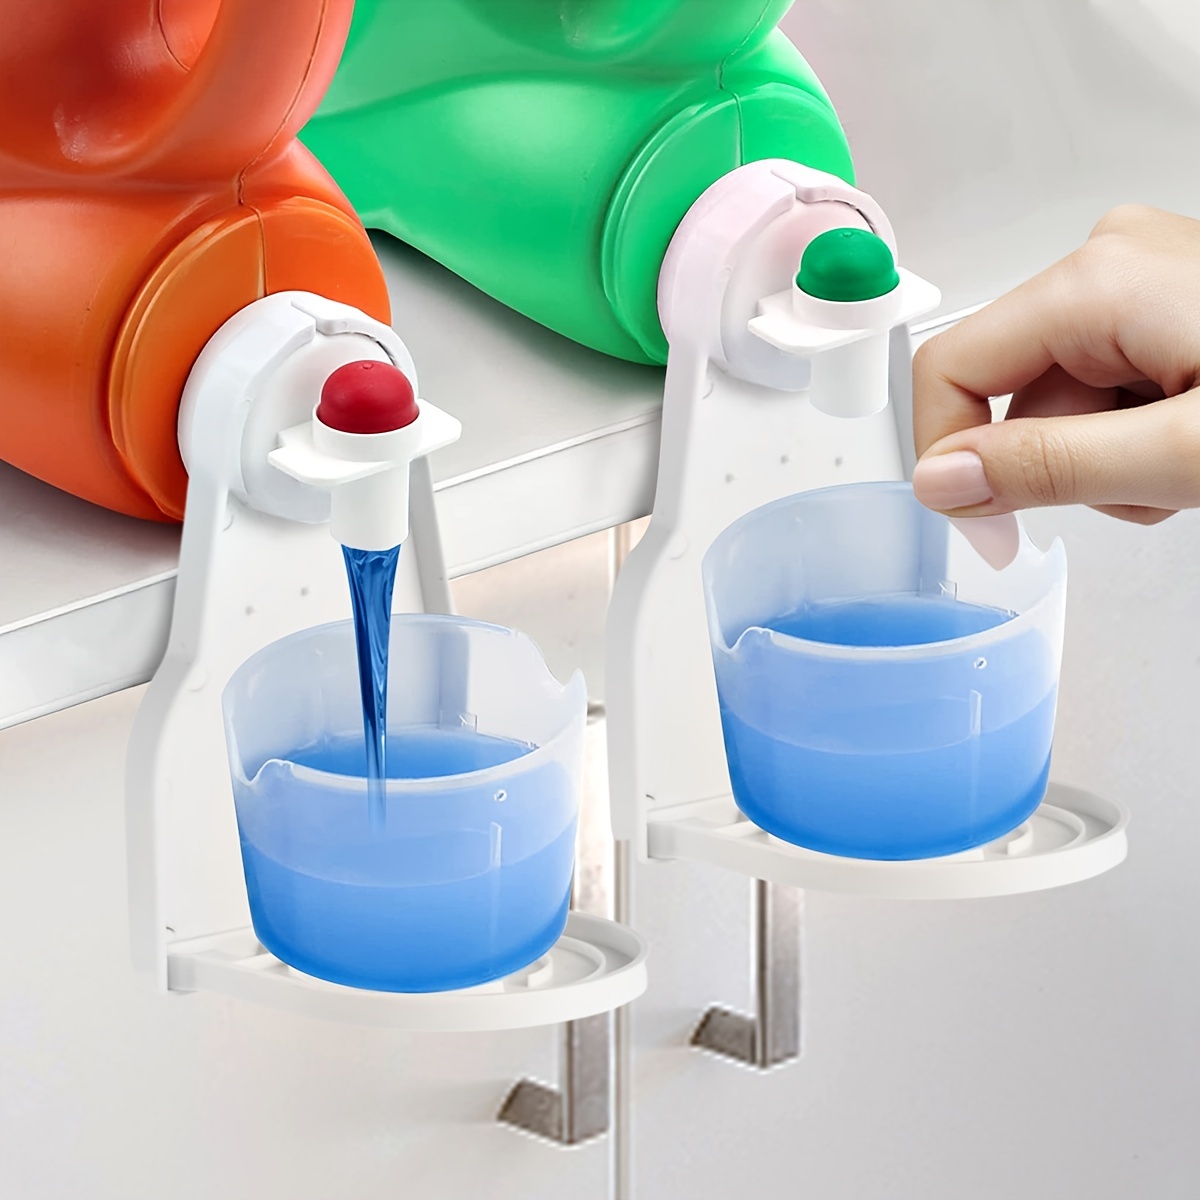 2 Pack] Laundry Detergent Cup Holder, Detergent Drip Catcher (Upgraded Drip  Tray), No More Mess or Leaks 